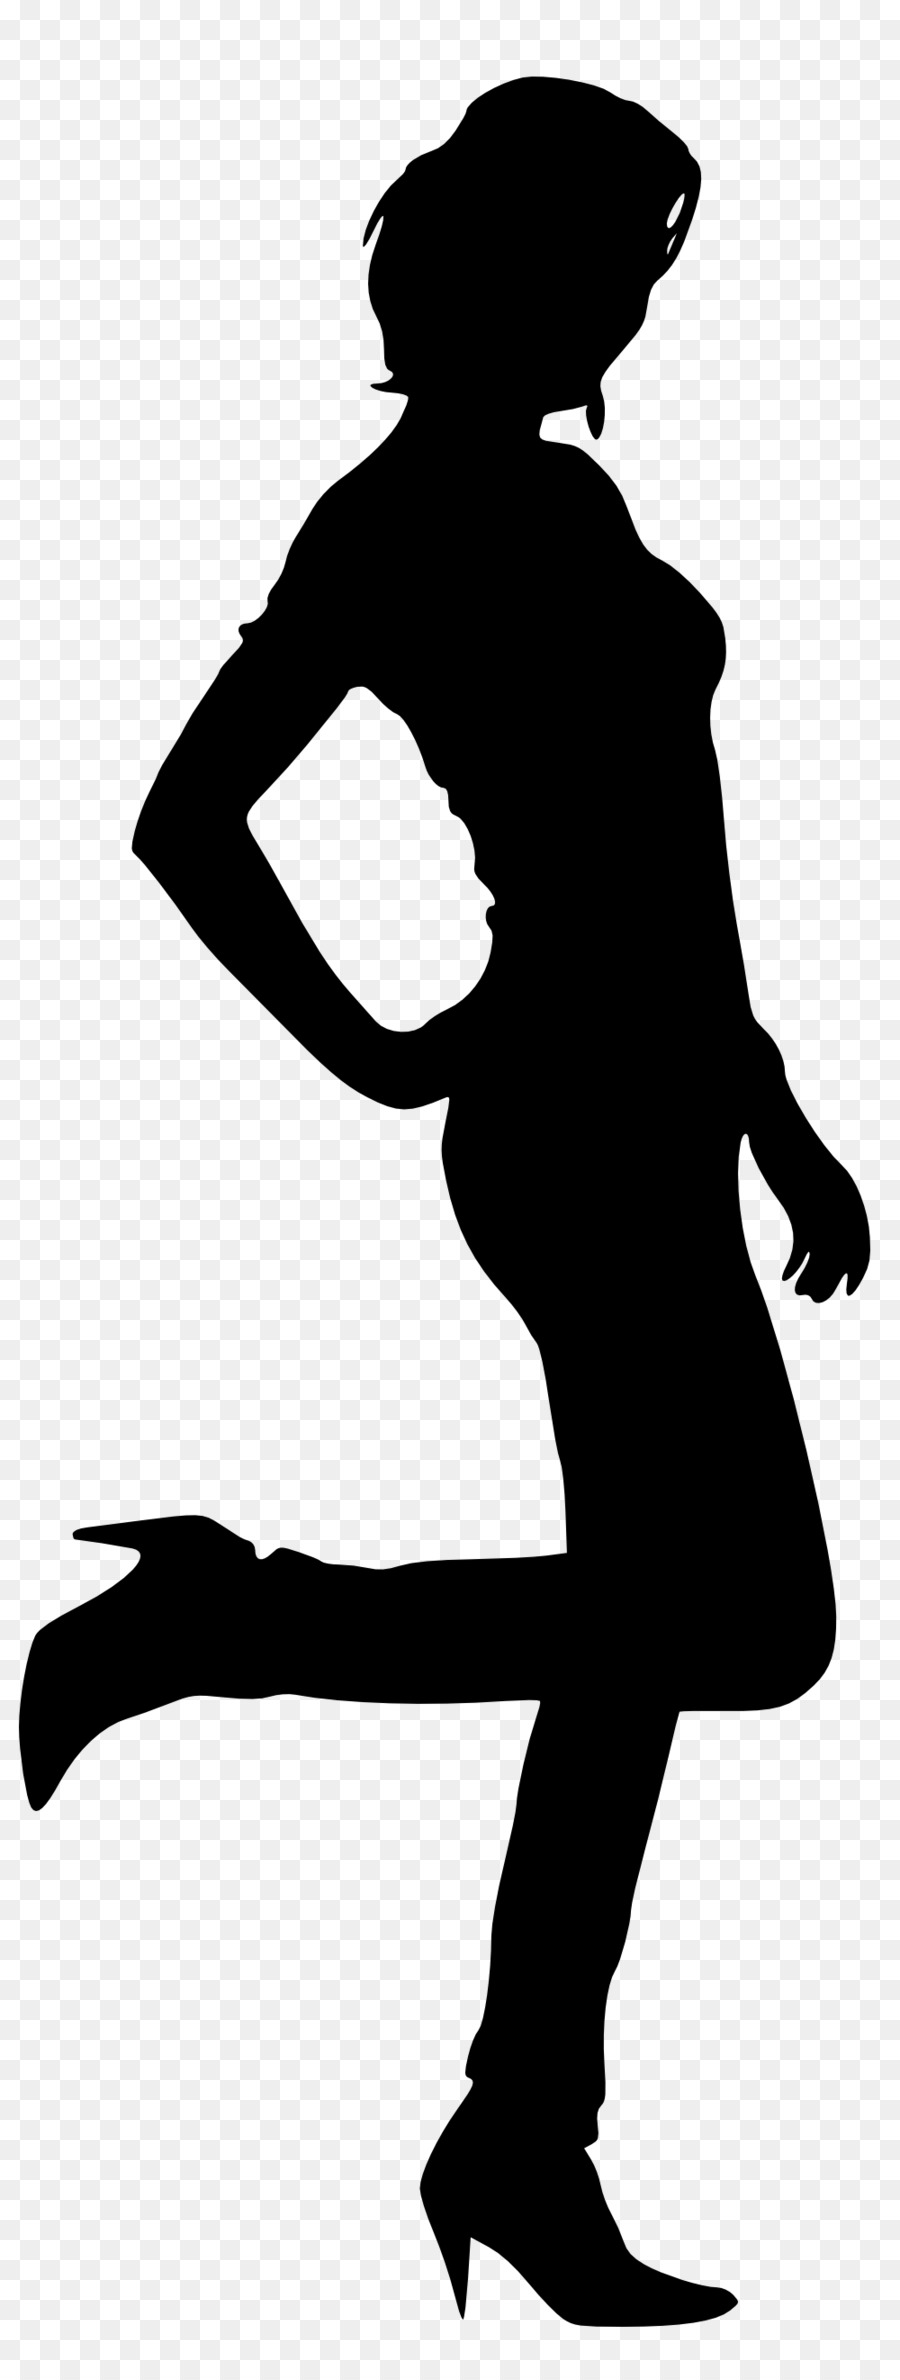 Silhouette Woman Female Clip art - woman silhouette png download - 1000*2643 - Free Transparent Silhouette png Download.